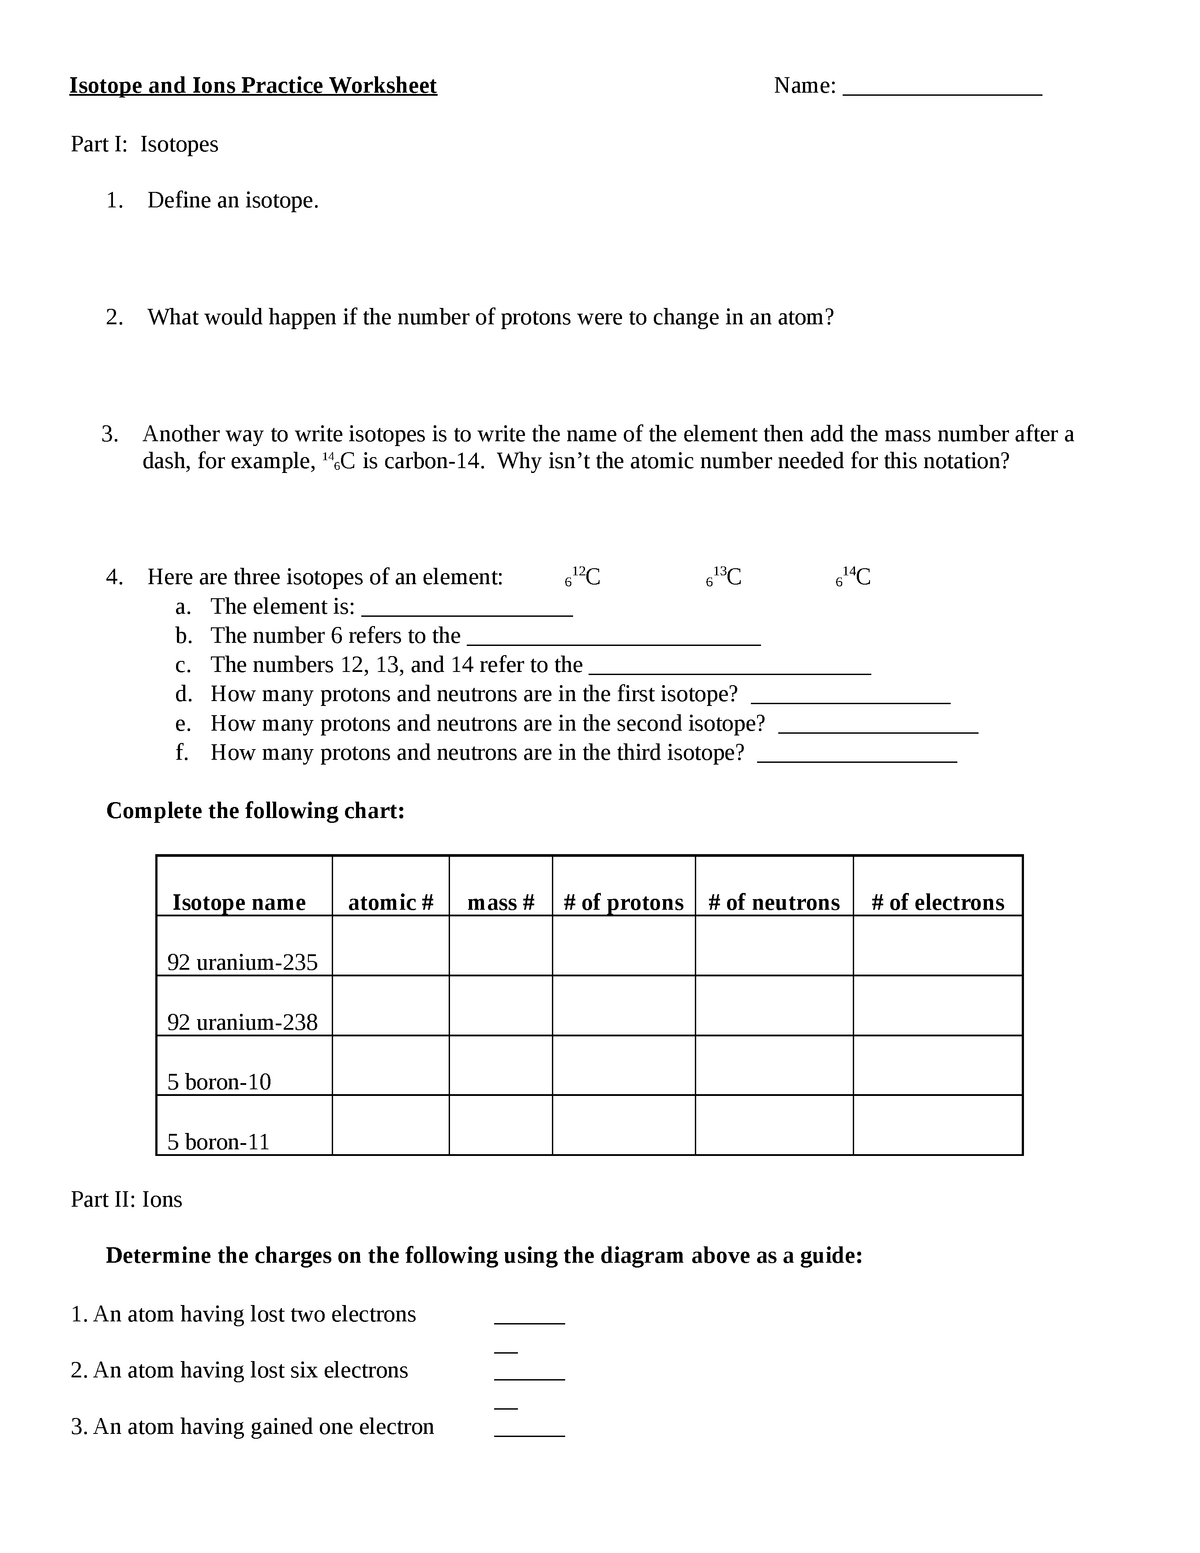 Isotope And Ion Practice - What would happen if the number of Within Isotope Practice Worksheet Answers